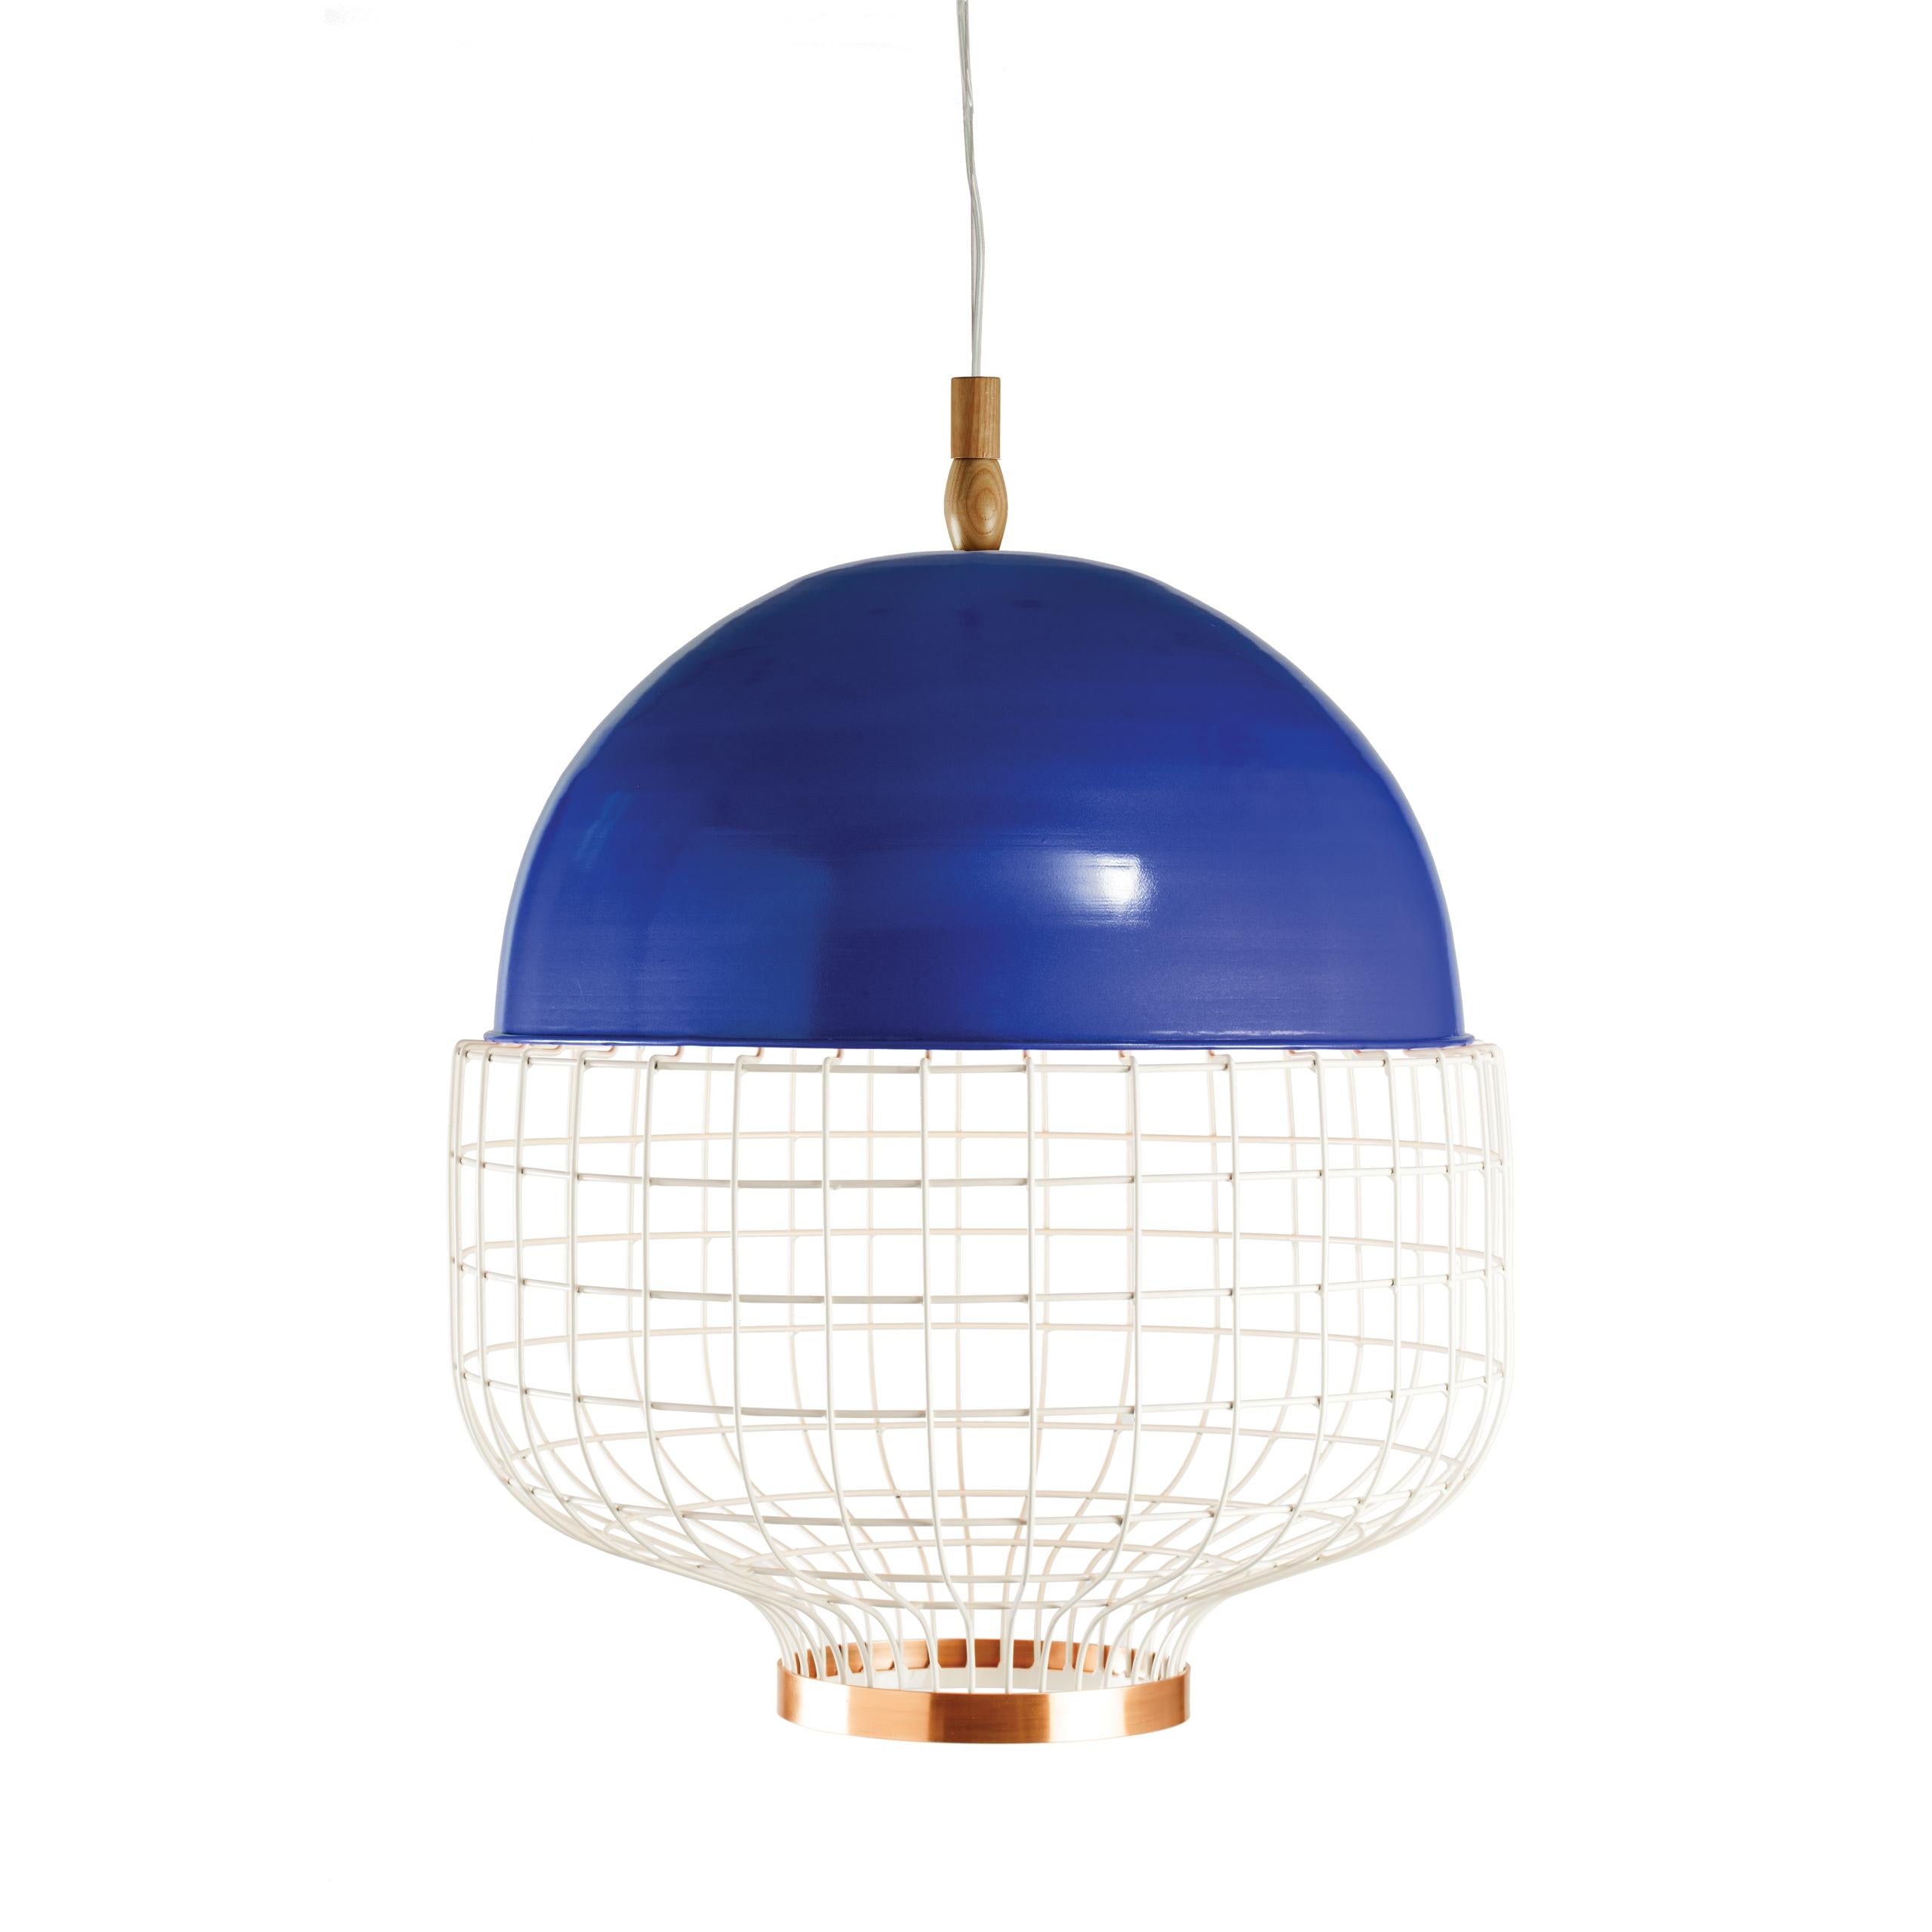 When geometry meets beauty, we find Magnolia range of lamps. Magnolia's soft top sits upon a structured, gridded bottom. Pure lines and a delicate contrast of materials and opaque surface with a see through one.
The Magnolia pendant lamp is